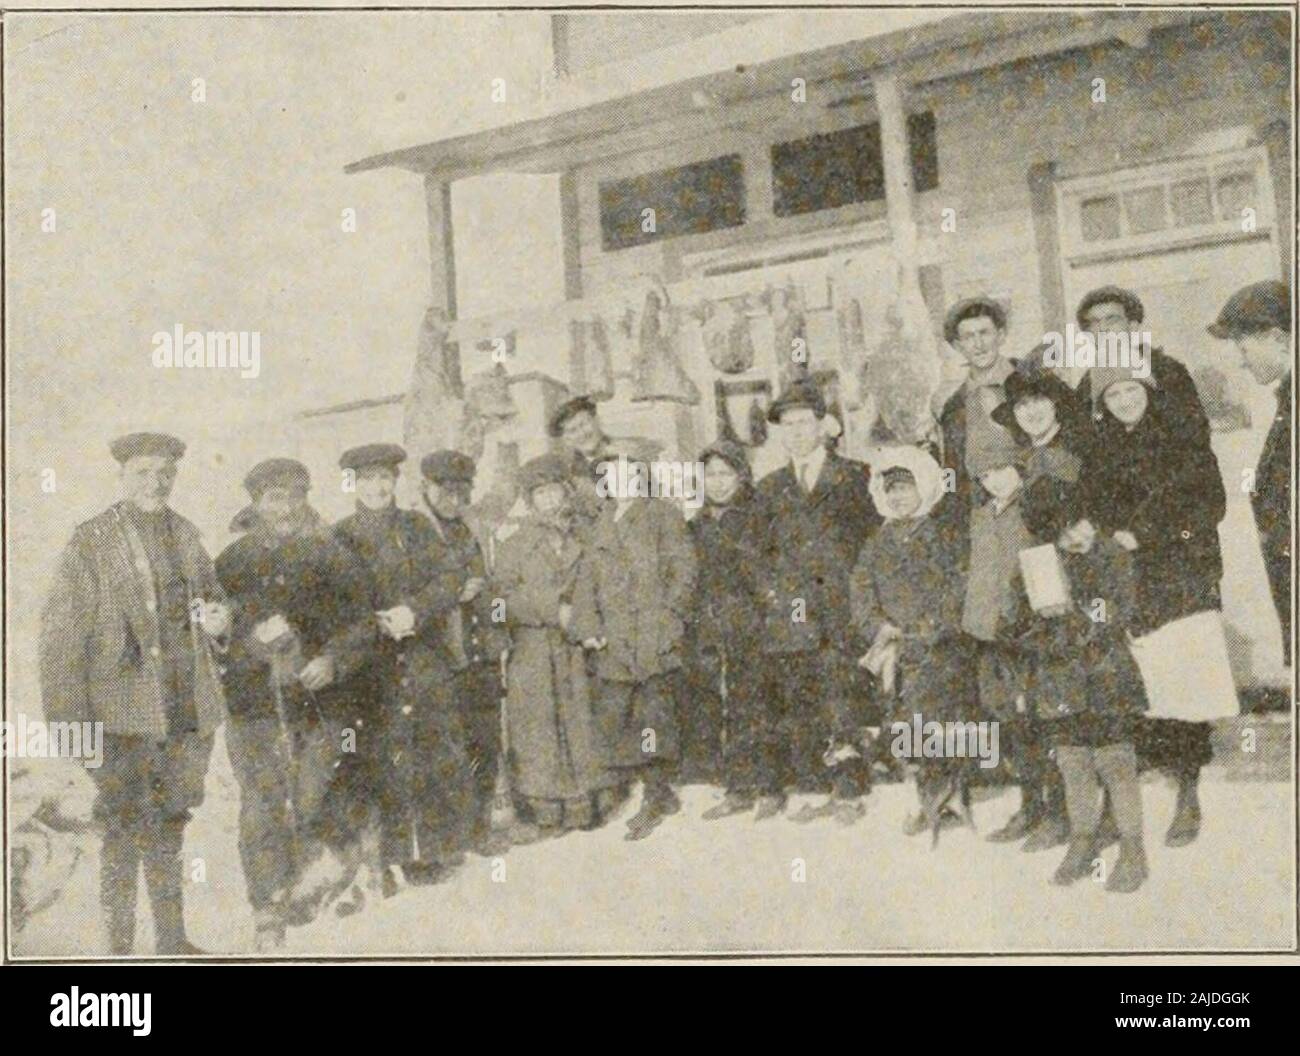 Canadian grocer April-June 1918 . Store ofJ. A. ST. ONGE Natagan River In the Abitibi District, 408 milesnorthwest of Quebec. Tempera-ture of 42 below zero.. Some of the. CUSTOMERS Note a complete family of In-dians. Photo taken in early Jan-uary, when the Indian trappersemerge from the wilds to tradetheir skins and purchase sup-plies. THE popularity of FIVE ROSES flour is trulydemocratic, for it knows no class distinction. Outon the outer fringes of civilization many hardyusers of FIVE ROSES flour identify the brand theyseek merely by the rat on the package. In crowdedcities or cultivated are Stock Photo